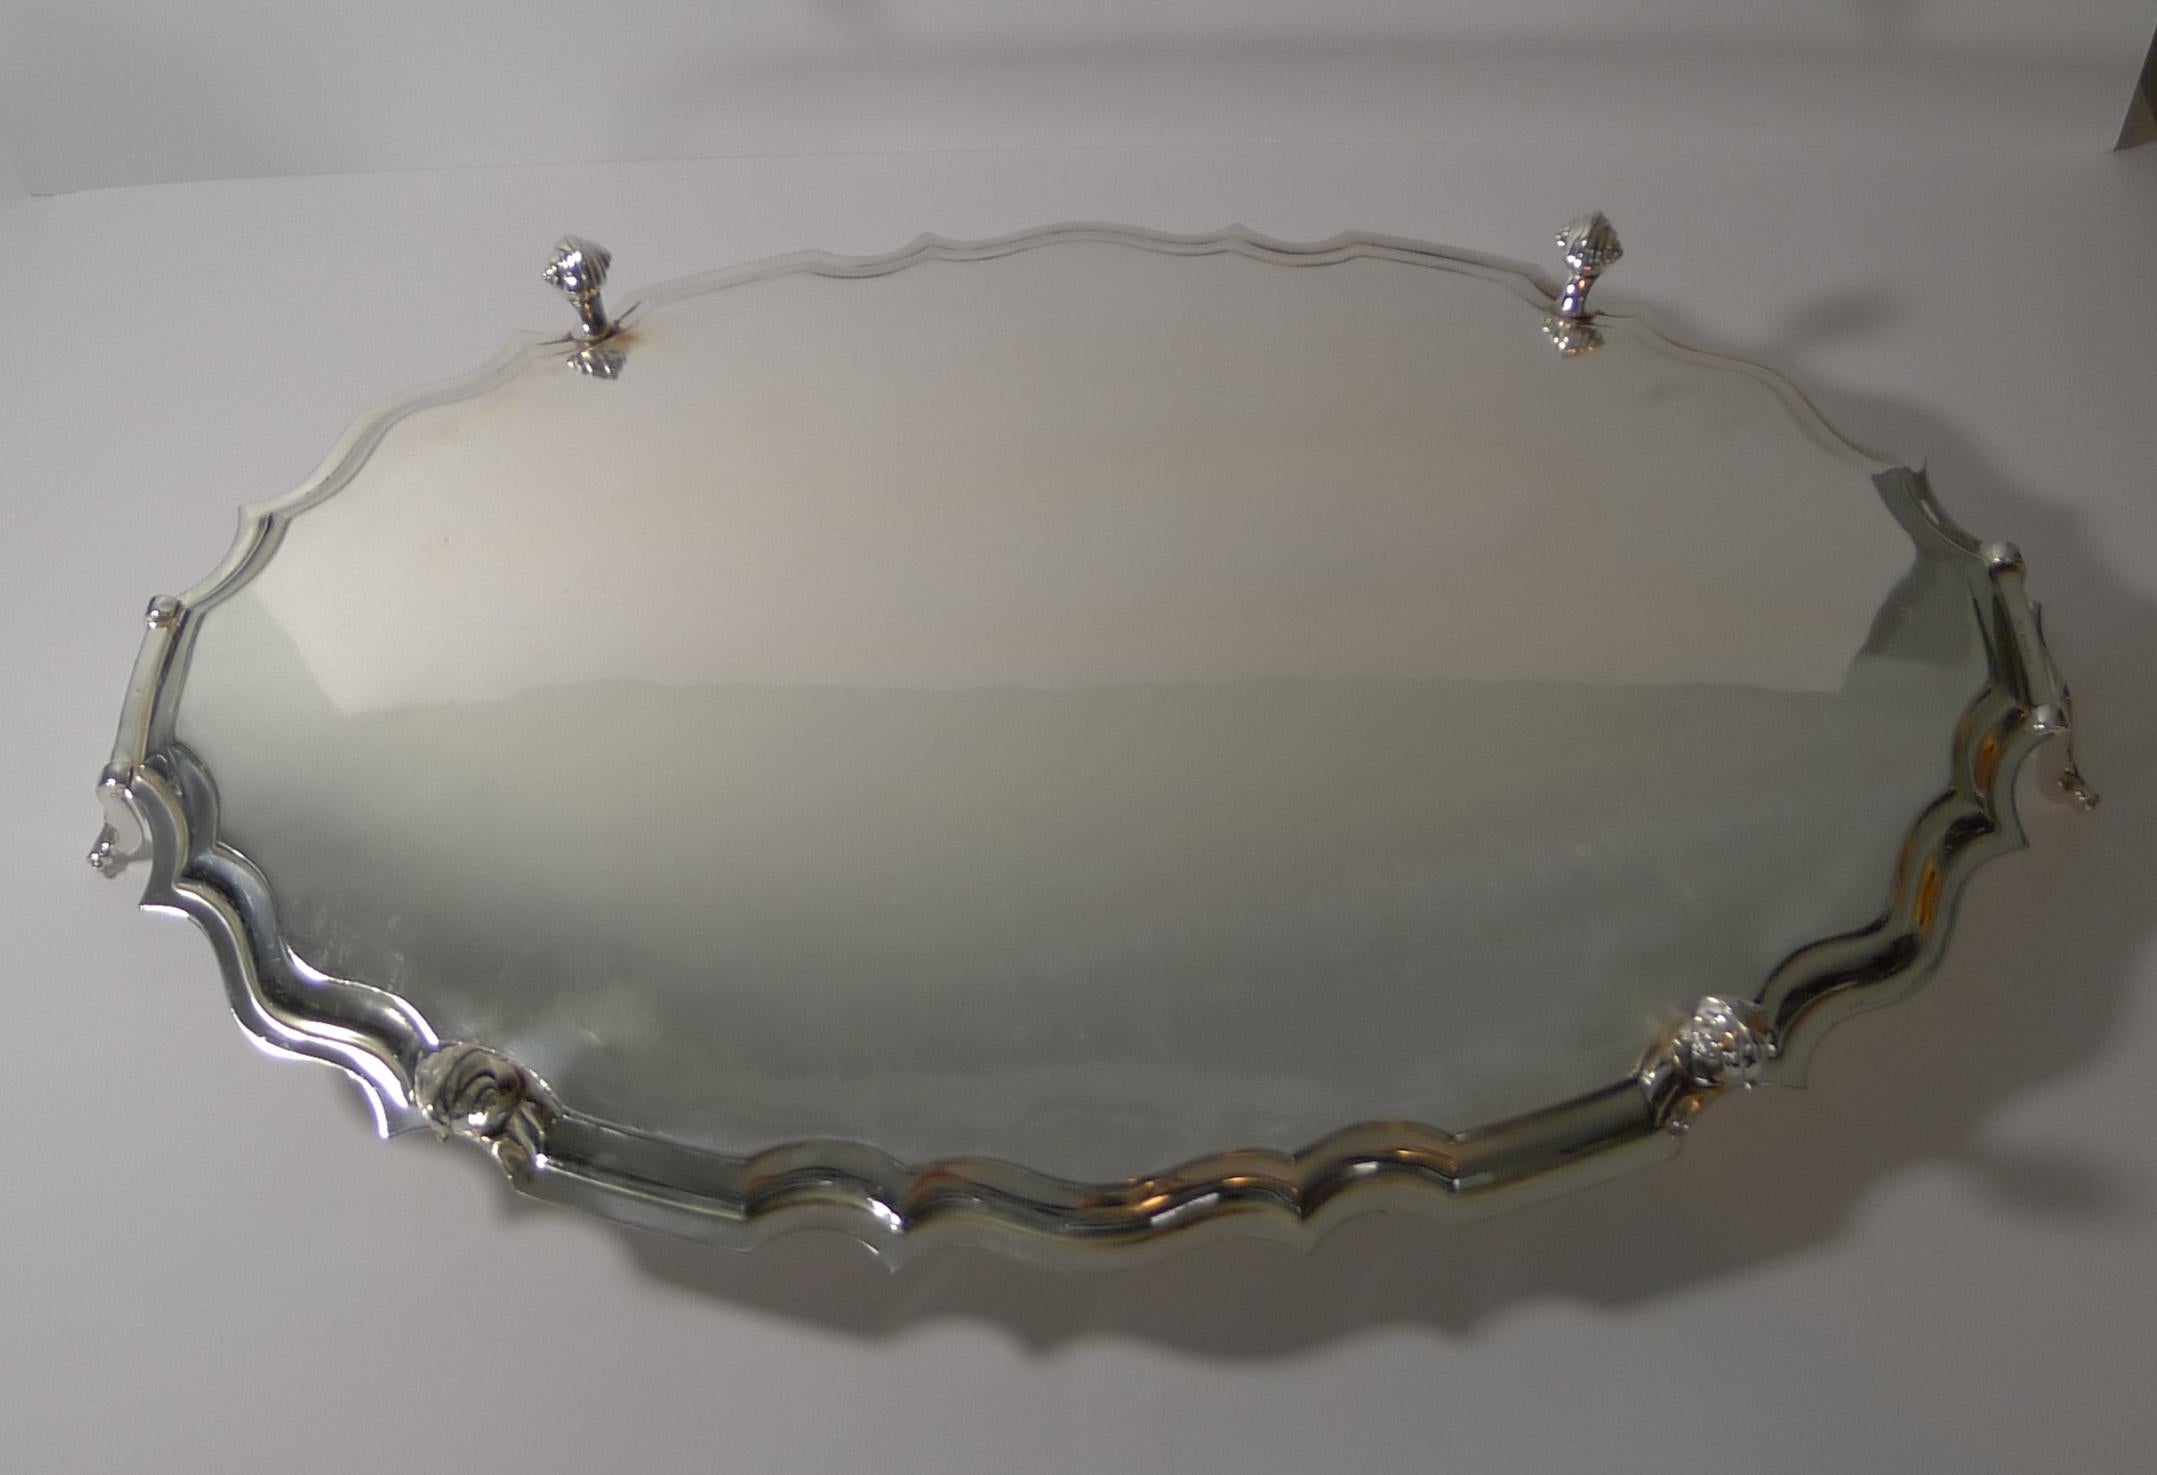 A fabulous and very elegant serving tray, perfect for a cocktail or drinks tray or indeed any use.

Made from silver plate, the tray stands on four elegant scroll feet with a pie crust edge and two lovely handles.

The underside is signed by the